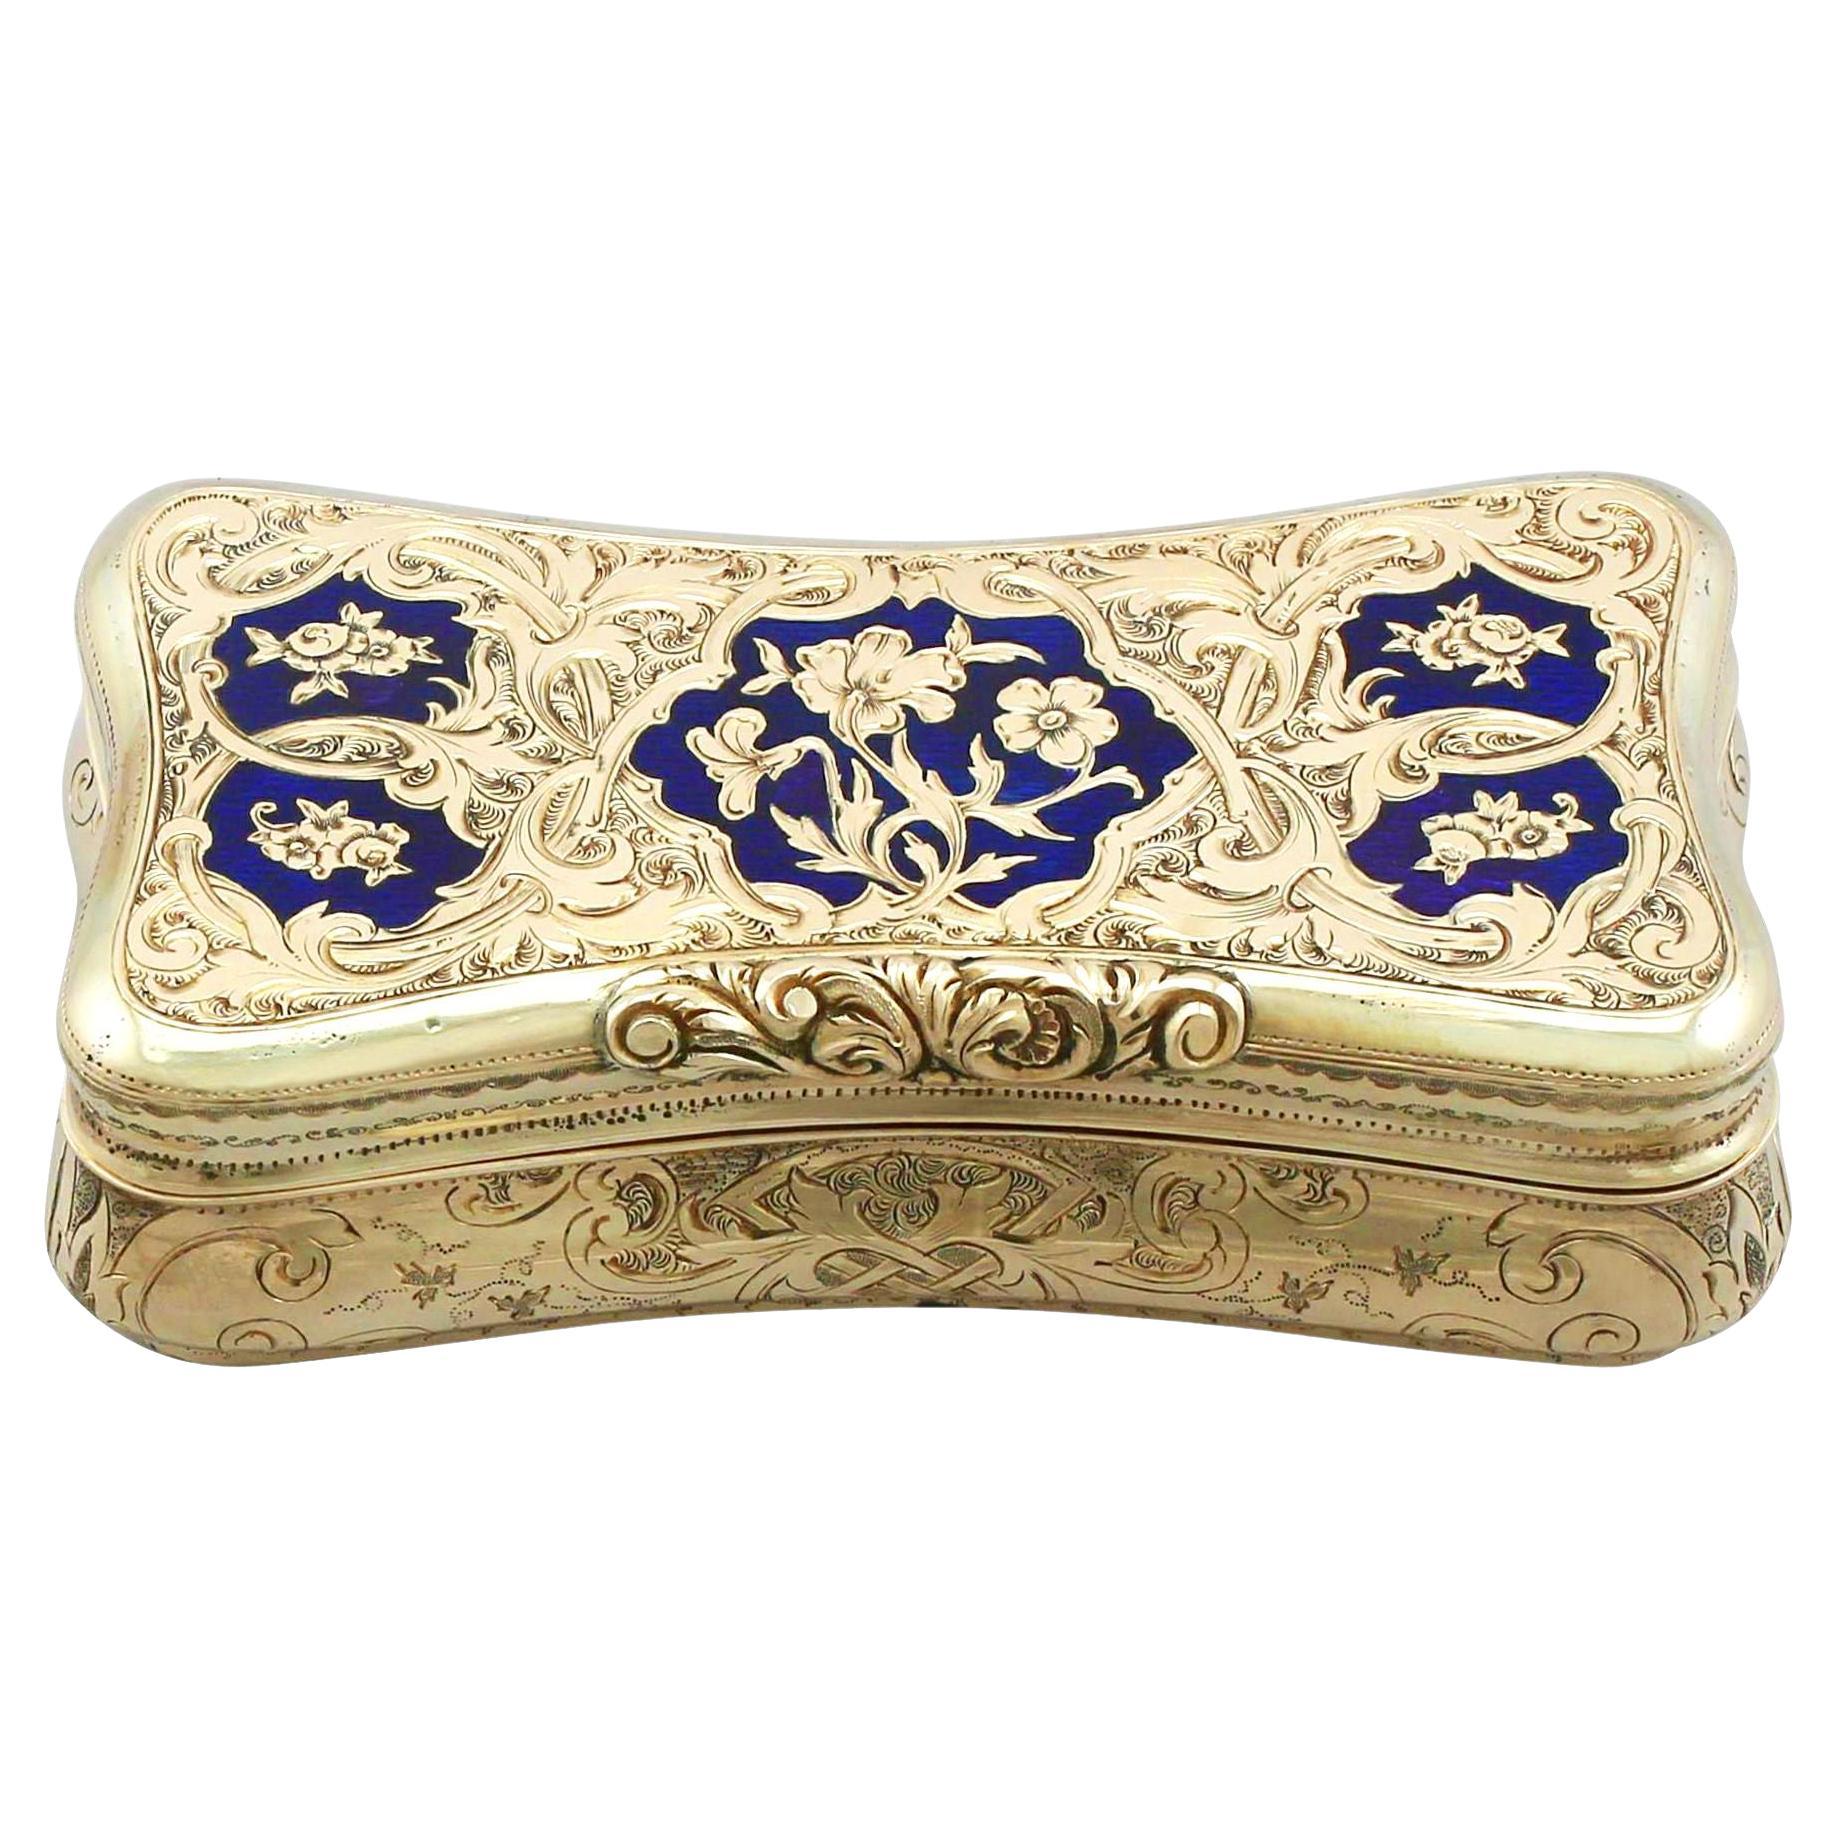 1840s Antique Swiss Yellow Gold and Enamel Snuff Box